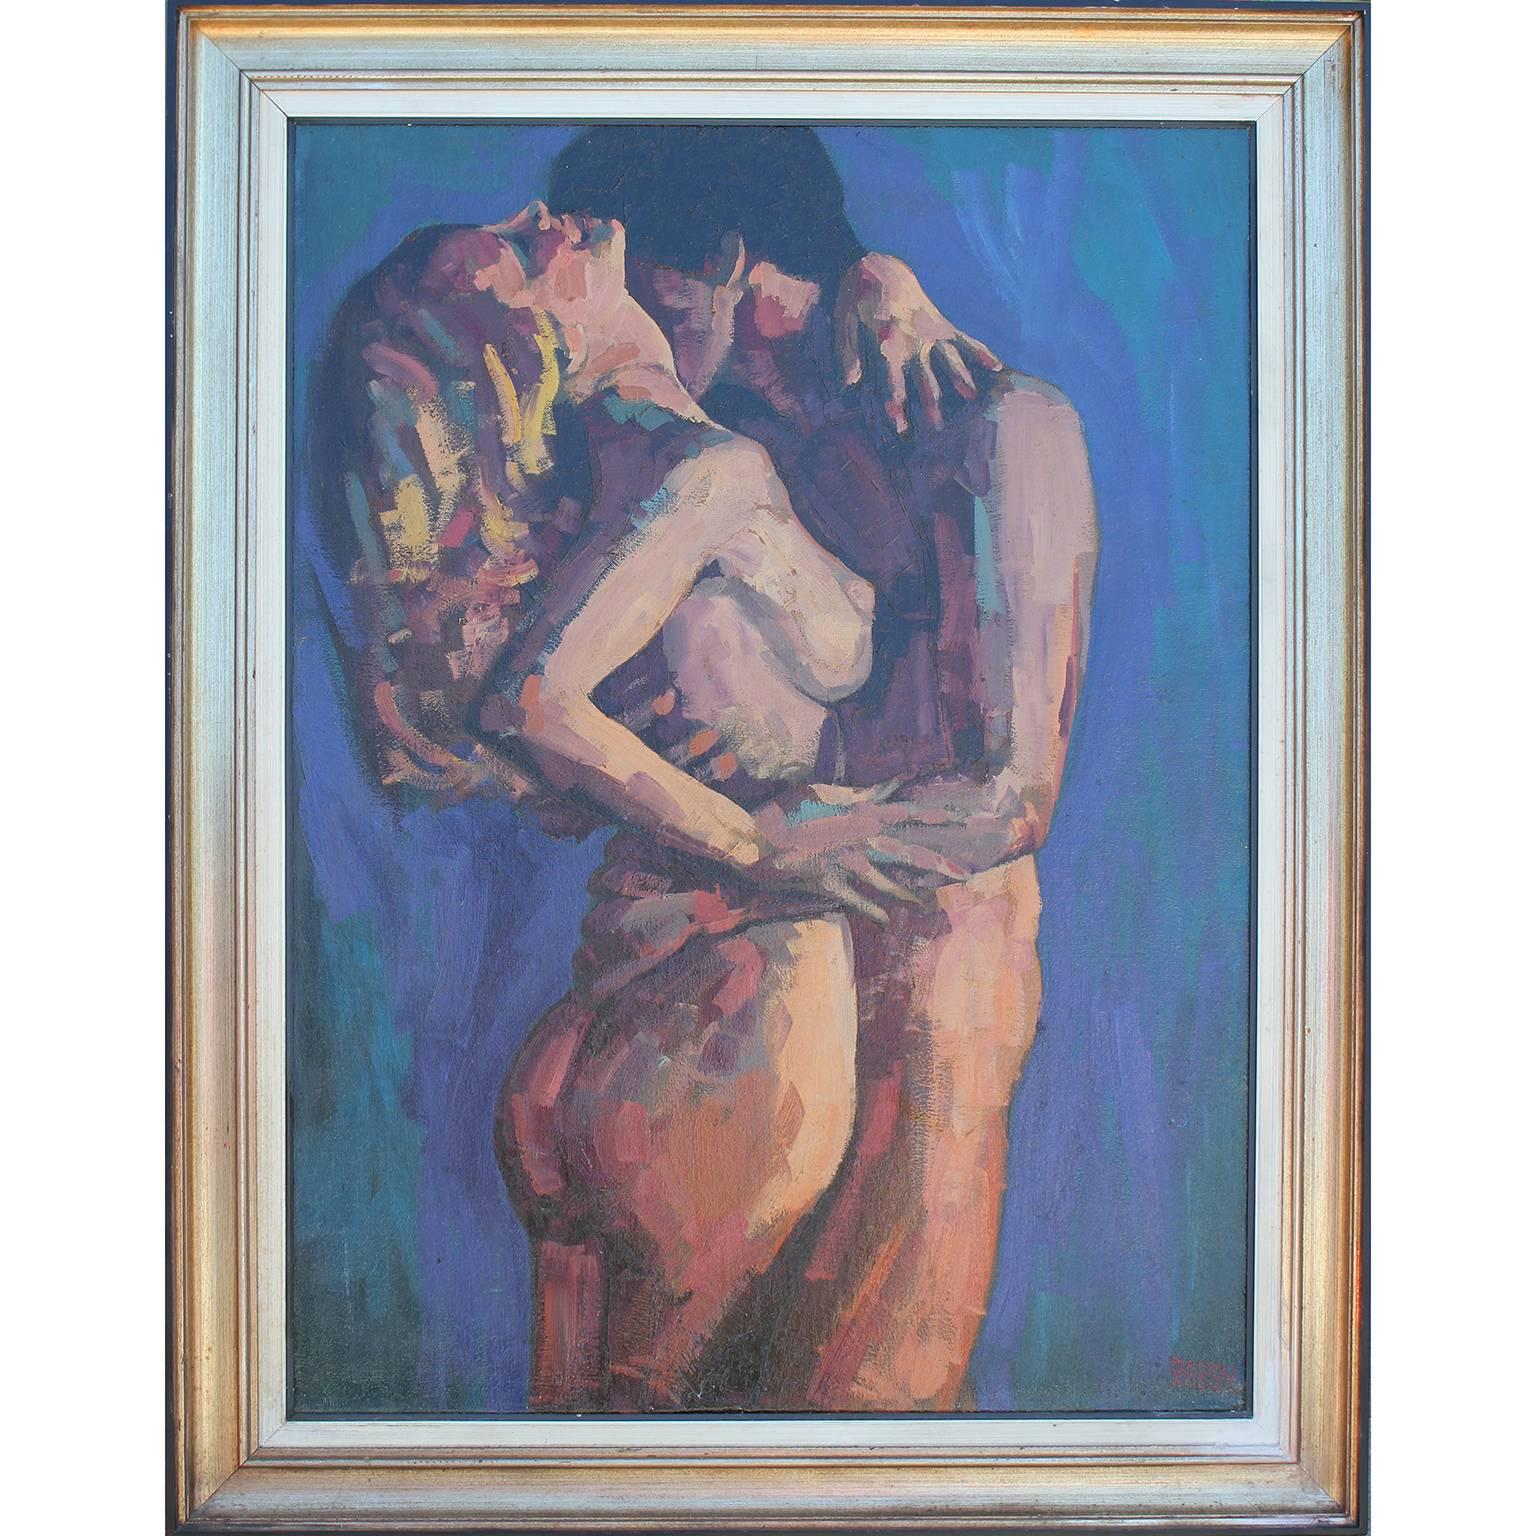 Jim Rabby Figurative Painting - Large Impressionist Textured Embracing Nude Painting